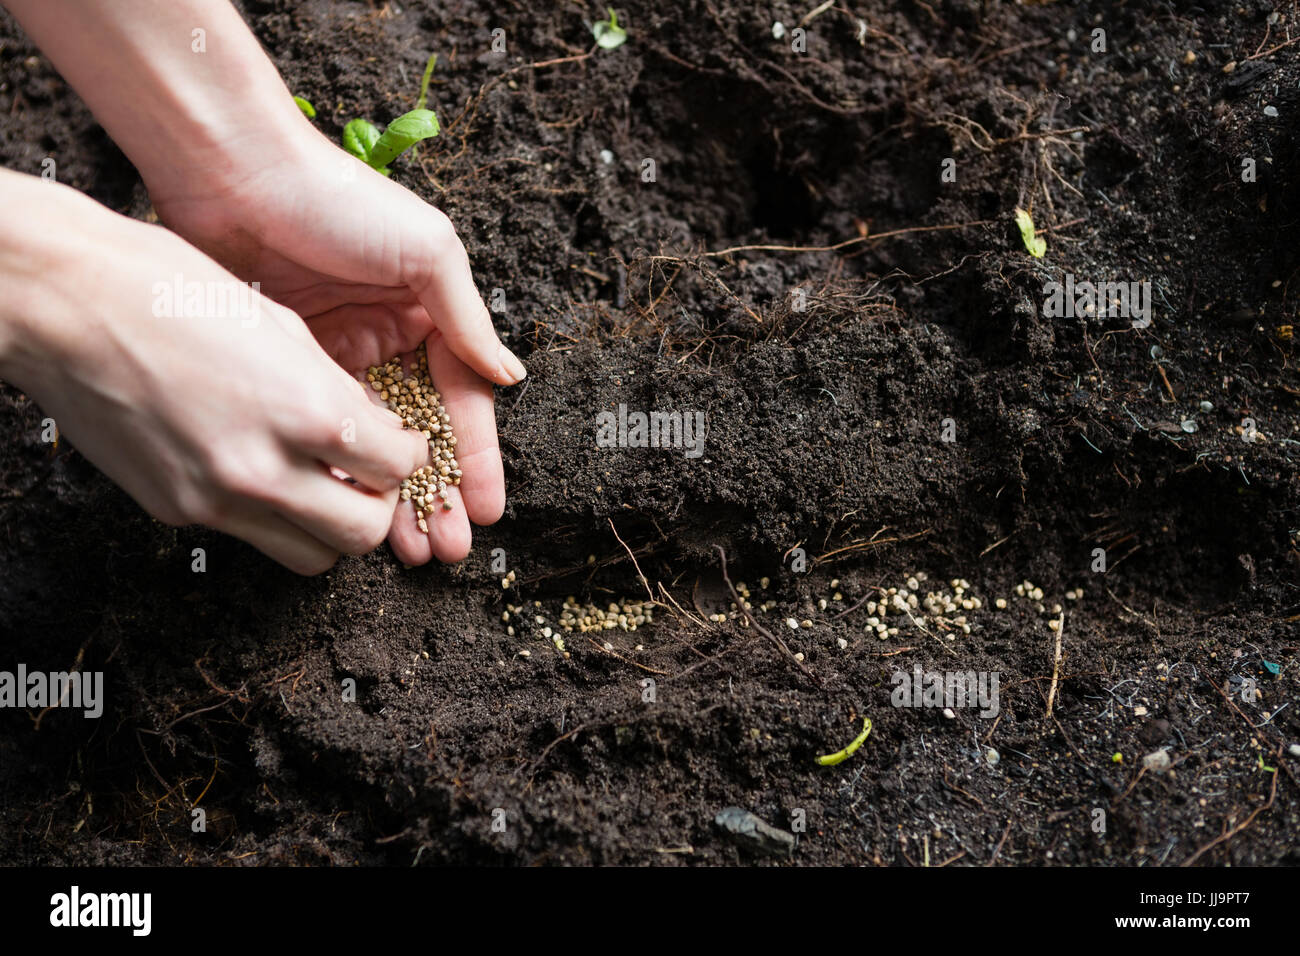 Hand of woman sowing seeds in soil at garden Stock Photo